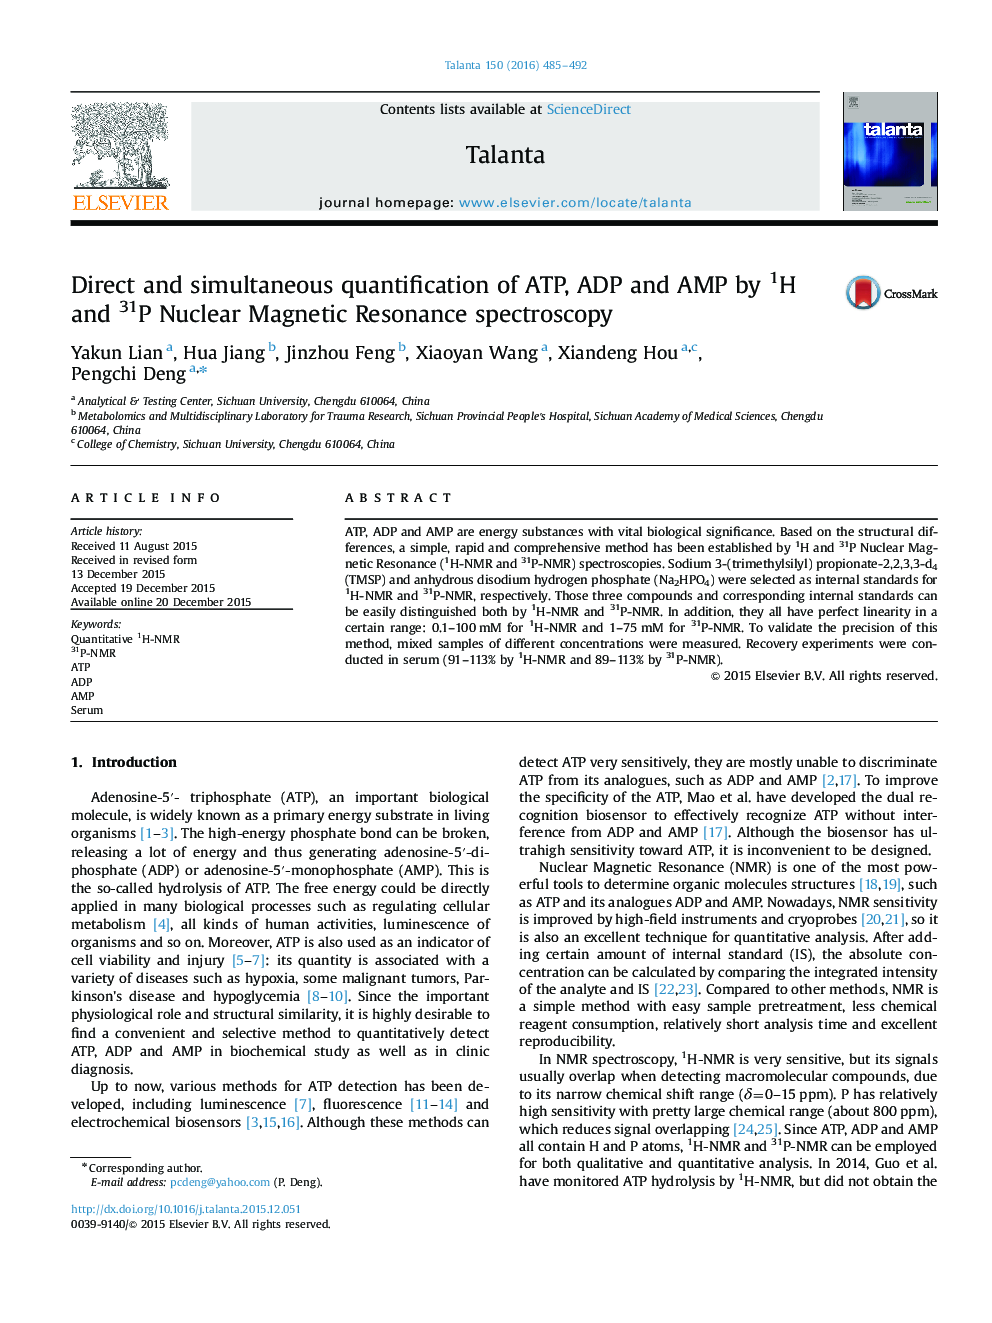 Direct and simultaneous quantification of ATP, ADP and AMP by 1H and 31P Nuclear Magnetic Resonance spectroscopy